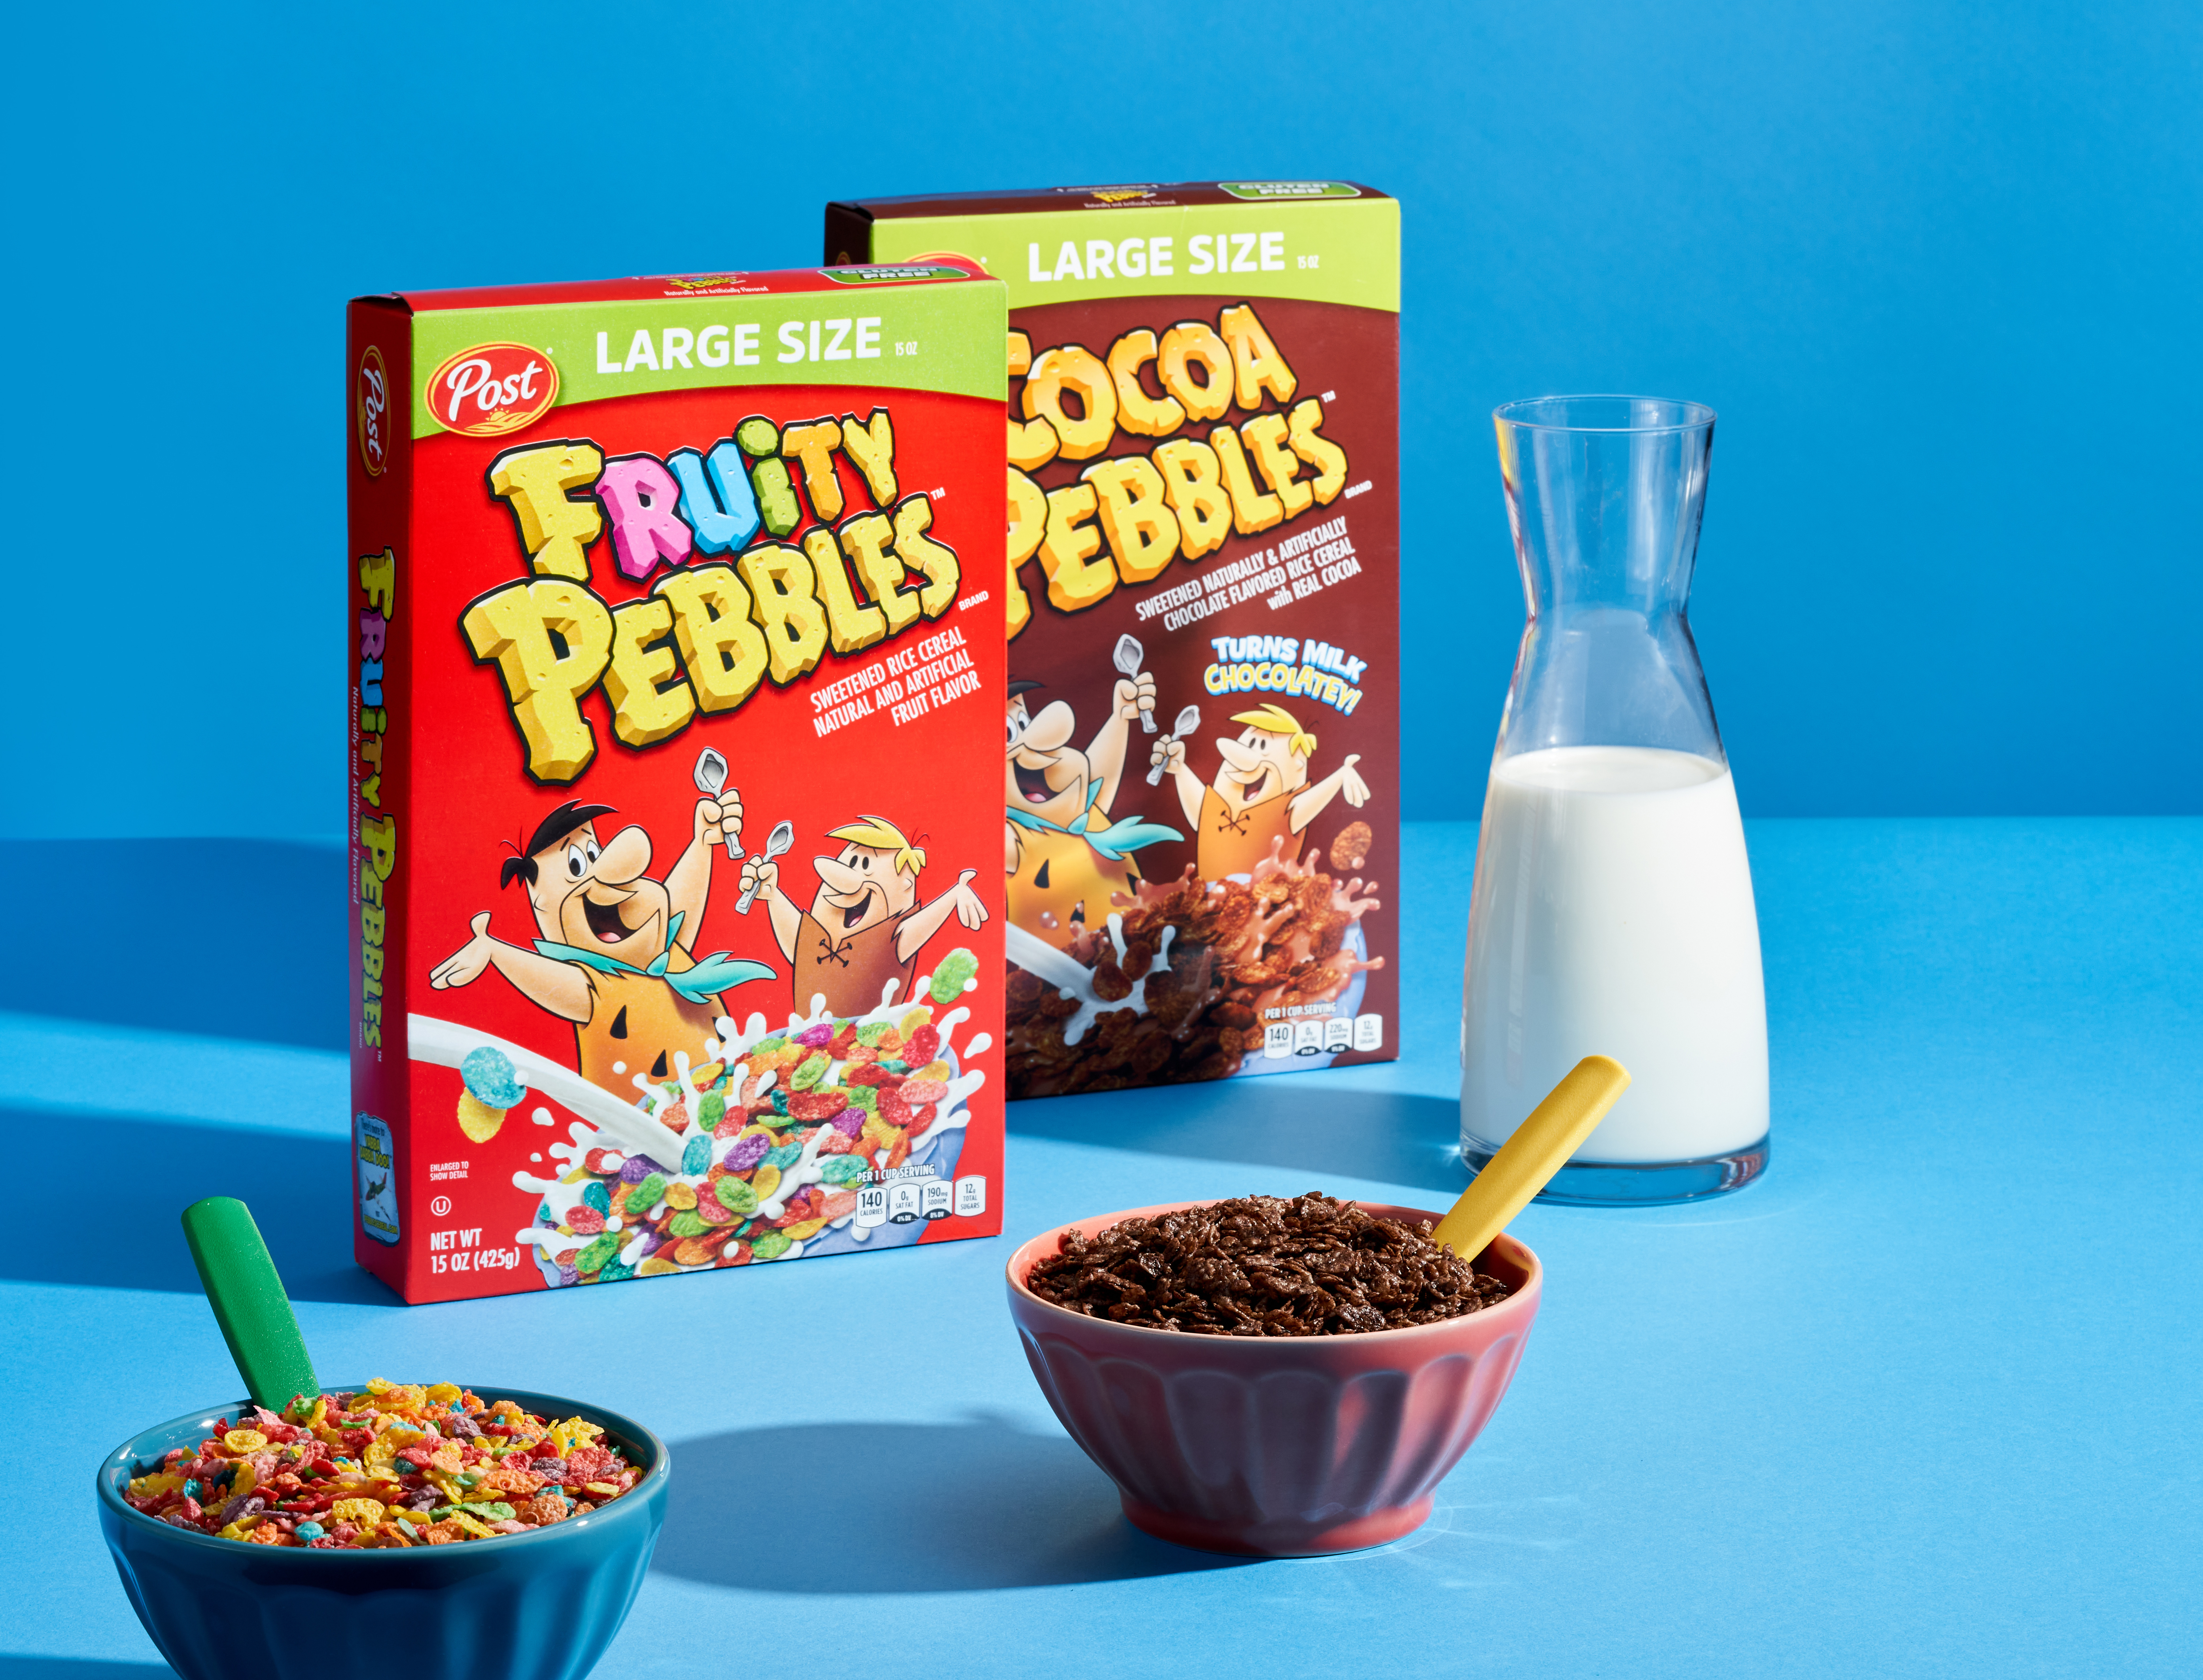 Fruity and Cocoa PEBBLES cereal